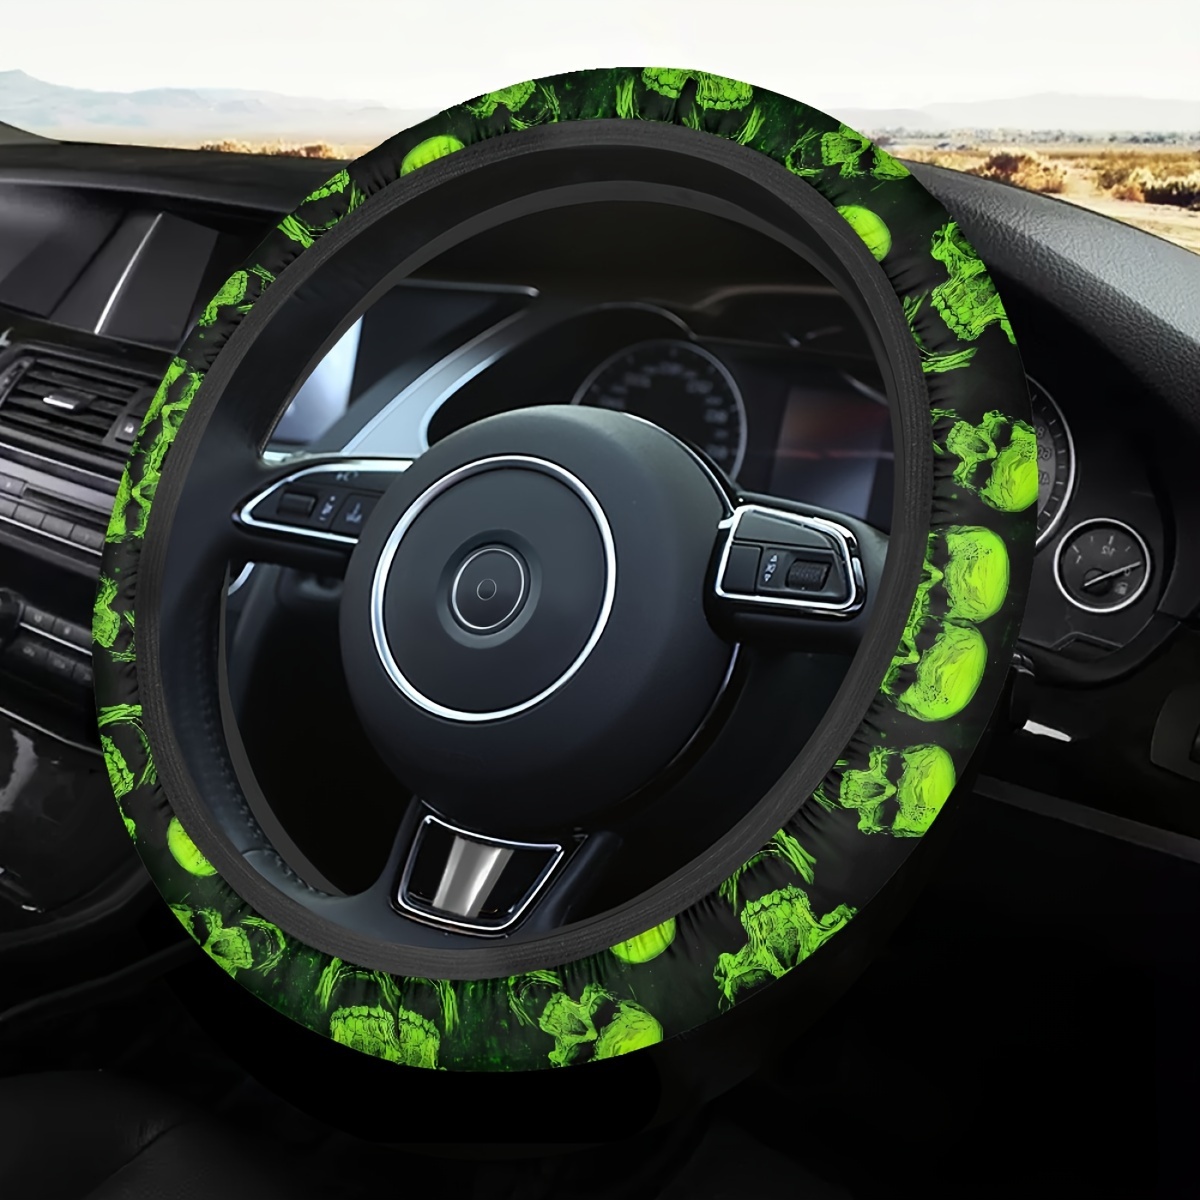 

1pc Green Glowing Print Car Steering Wheel Cover Comfortable Protective Cover Removable Anti-slip Car Accessories Ornament